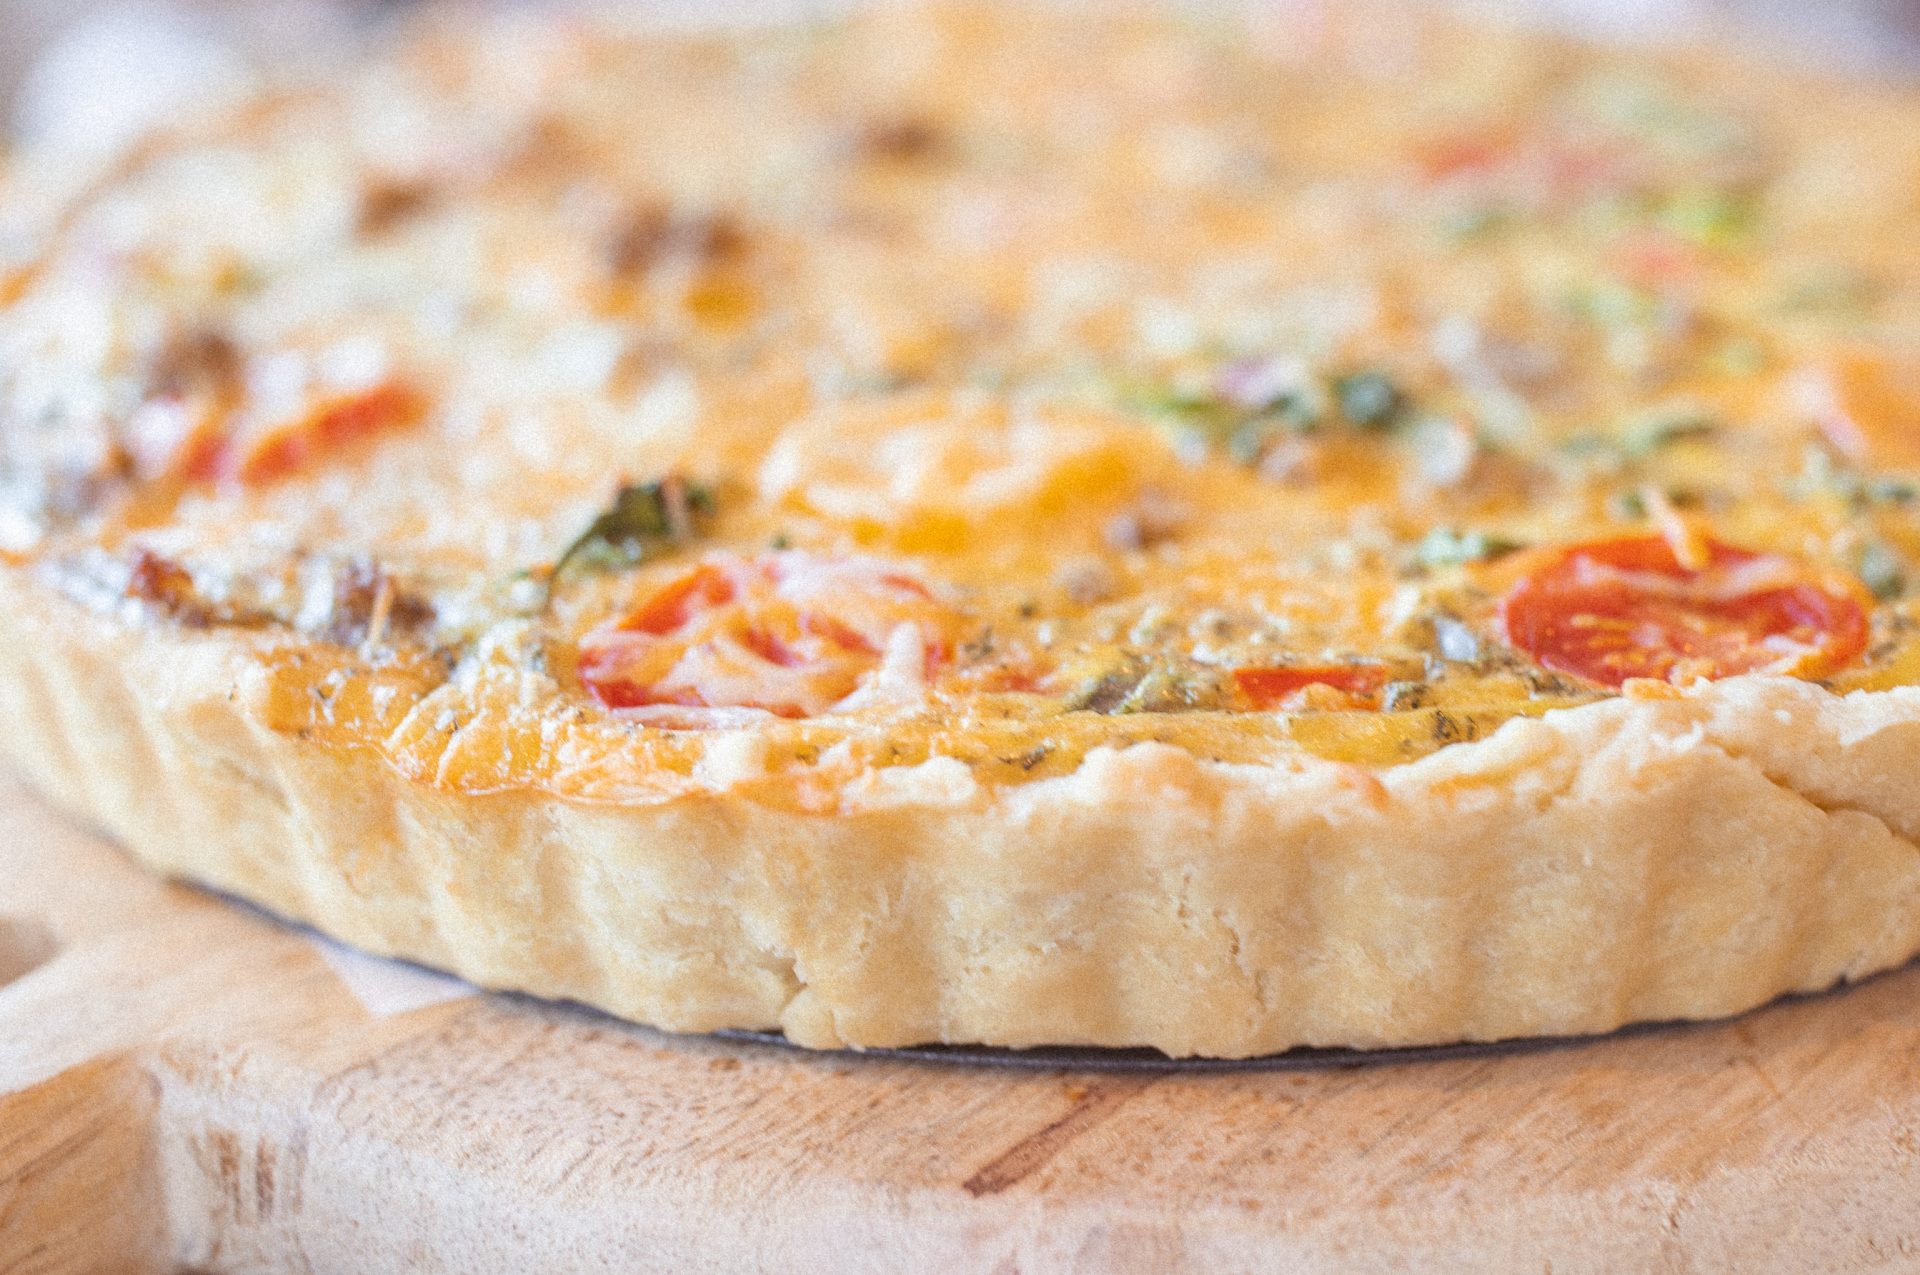 sourdough quiche crust, flaky quiche crust, flaky breakfast pie, breakfast pie, the best quiche recipe, vegetable and sausage quiche, breakfast, lunch, dinner, healthy recipe, sausage quiche, arugula, eating fresh, homemade quiche, the best quiche, fitting in more vegetables, diet recipes, healthy and fresh, farm to table, healthy recipes